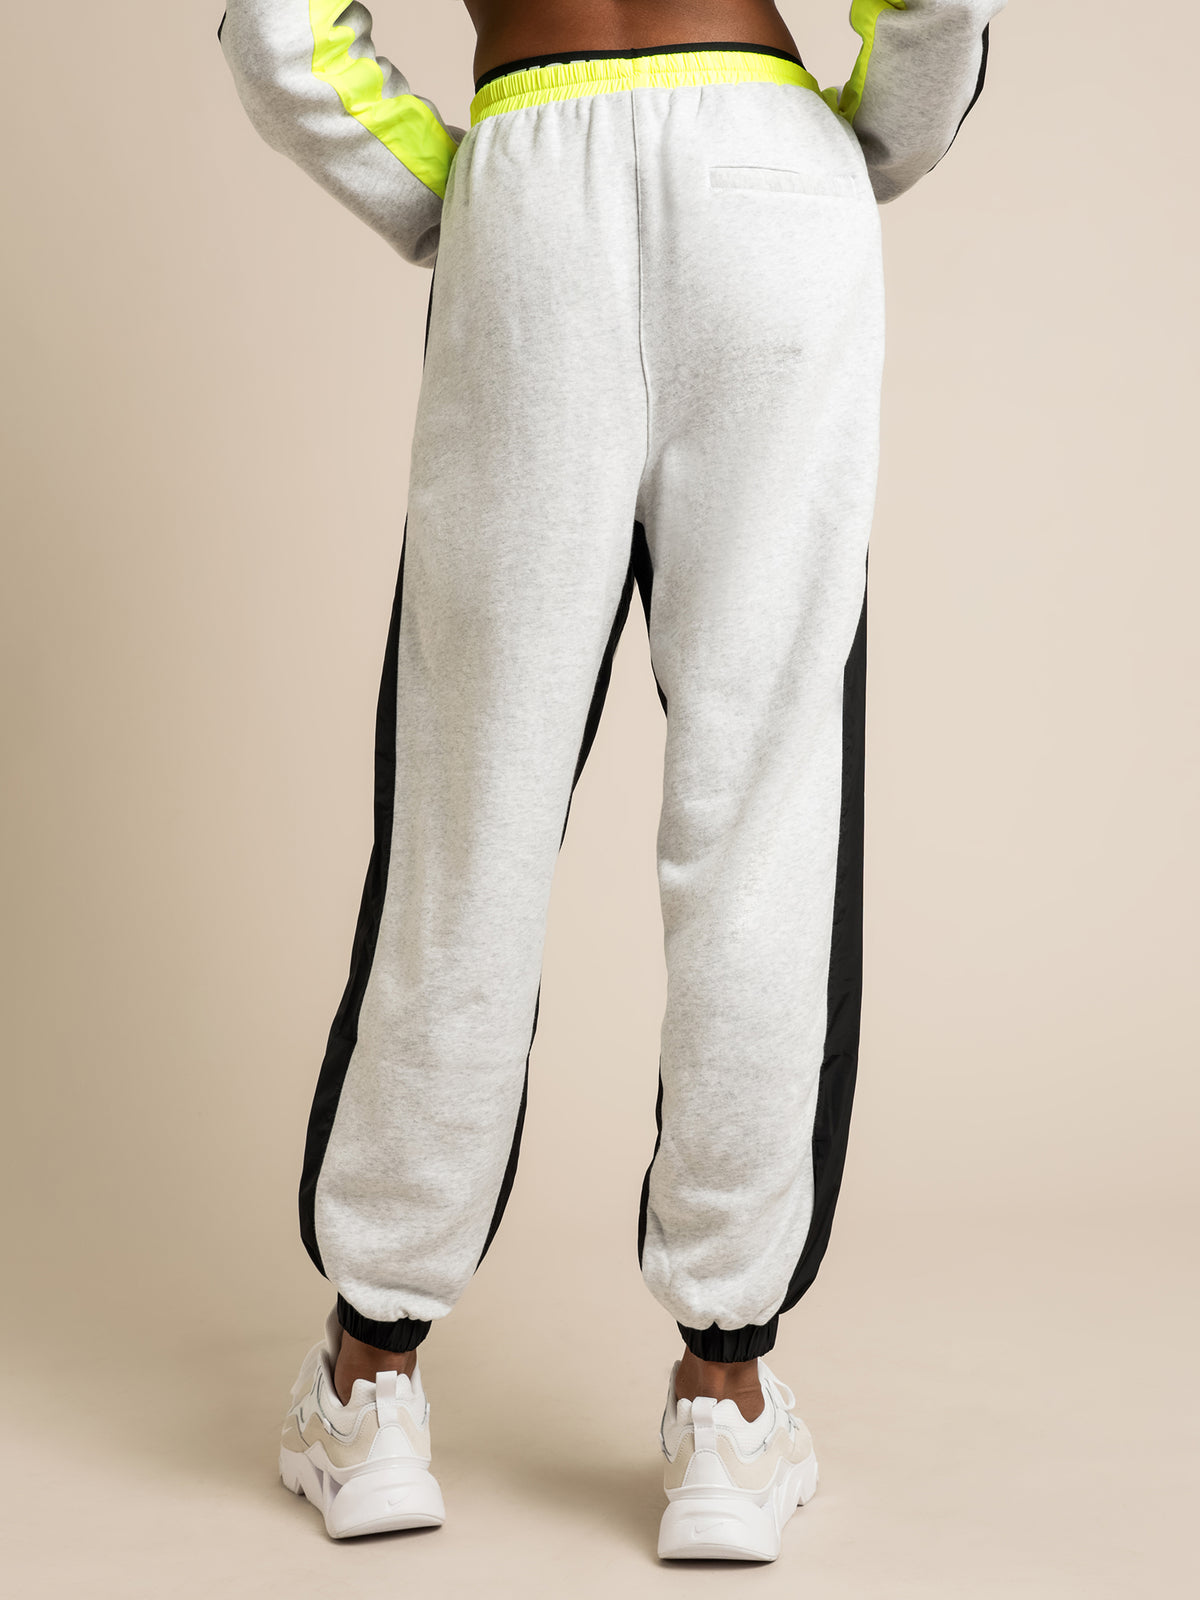 Opponent Track Pants in Grey Marl